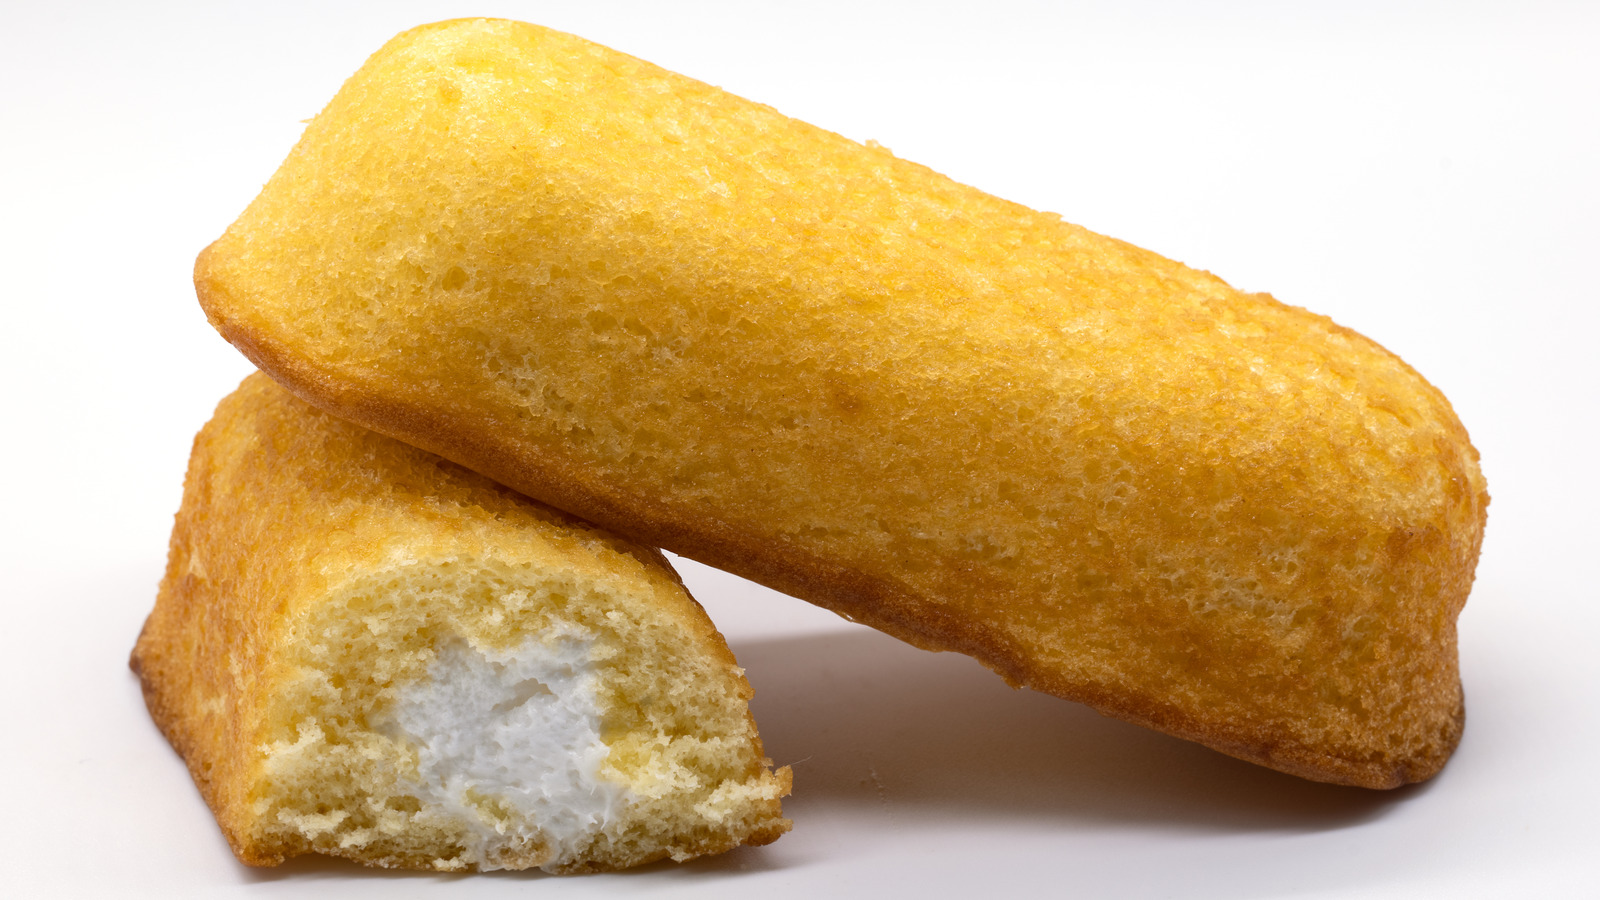 What Are The Creamy Centers Of Twinkies Made Of?